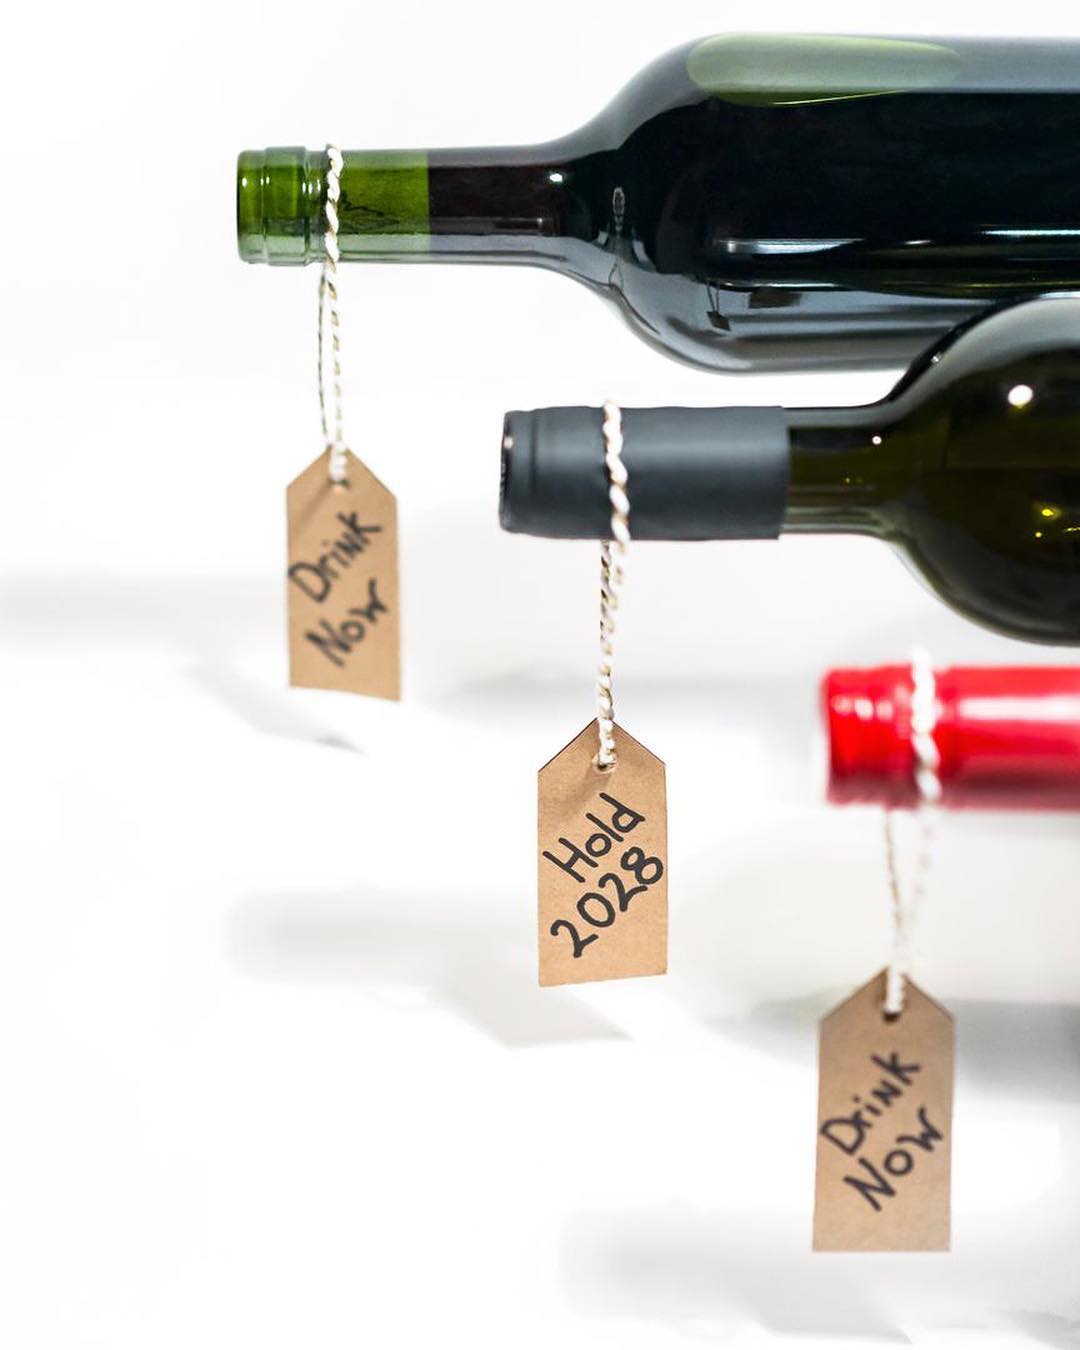 Wine Bottles with Tags to Indicate When to Drink. Photo by Instagram user @wineenthusiast